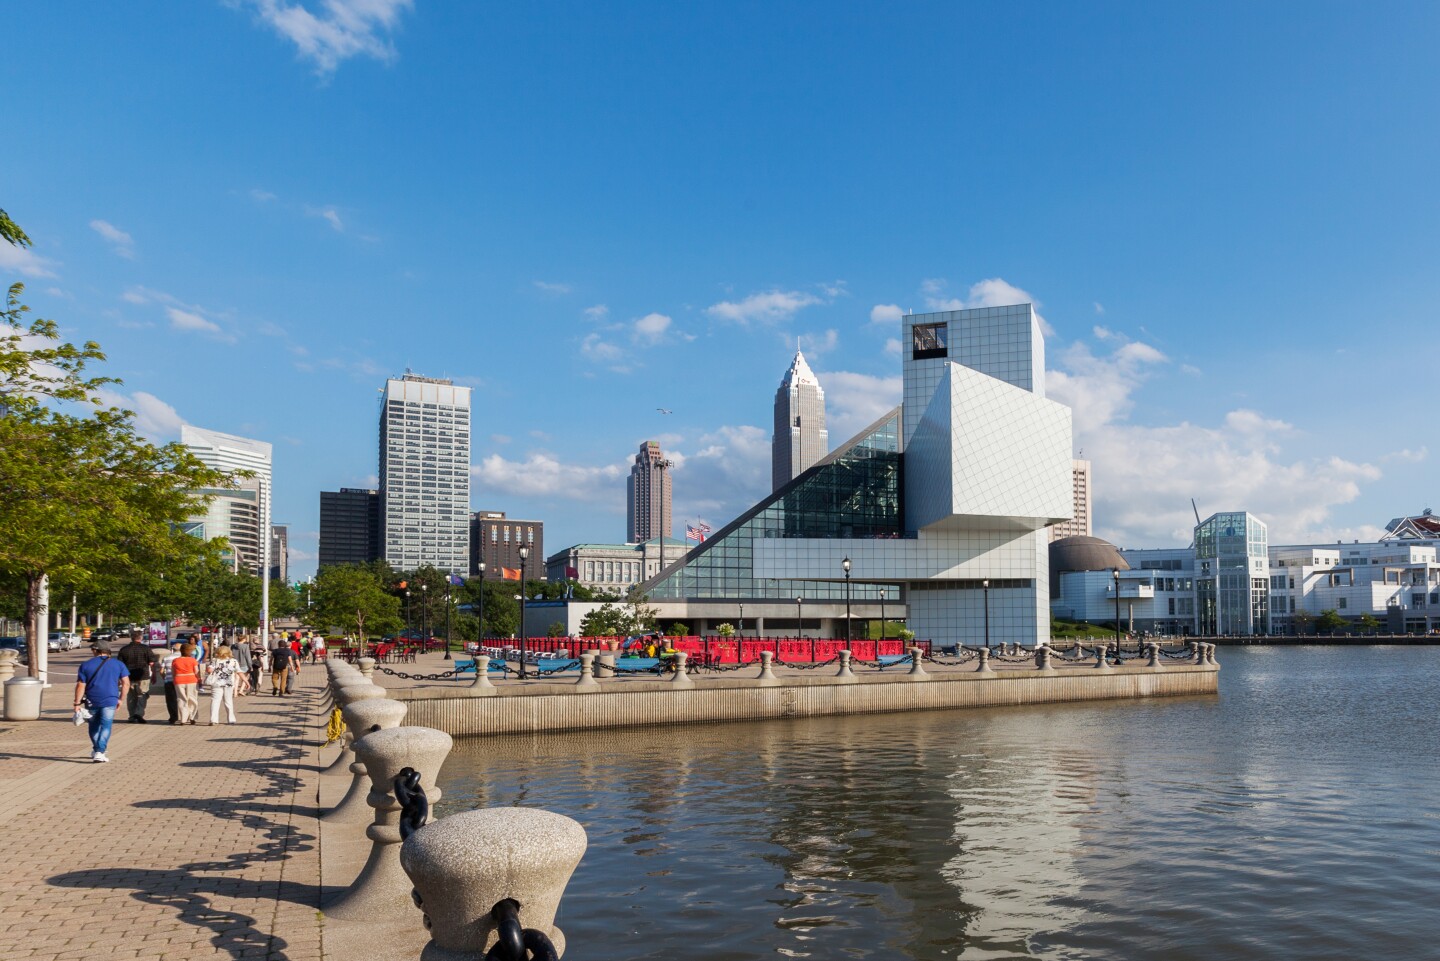 <a>The Rock & Roll Hall of Fame, designed by I. M. Pei, is dedicated to the most famous and influential figures in music.</a>